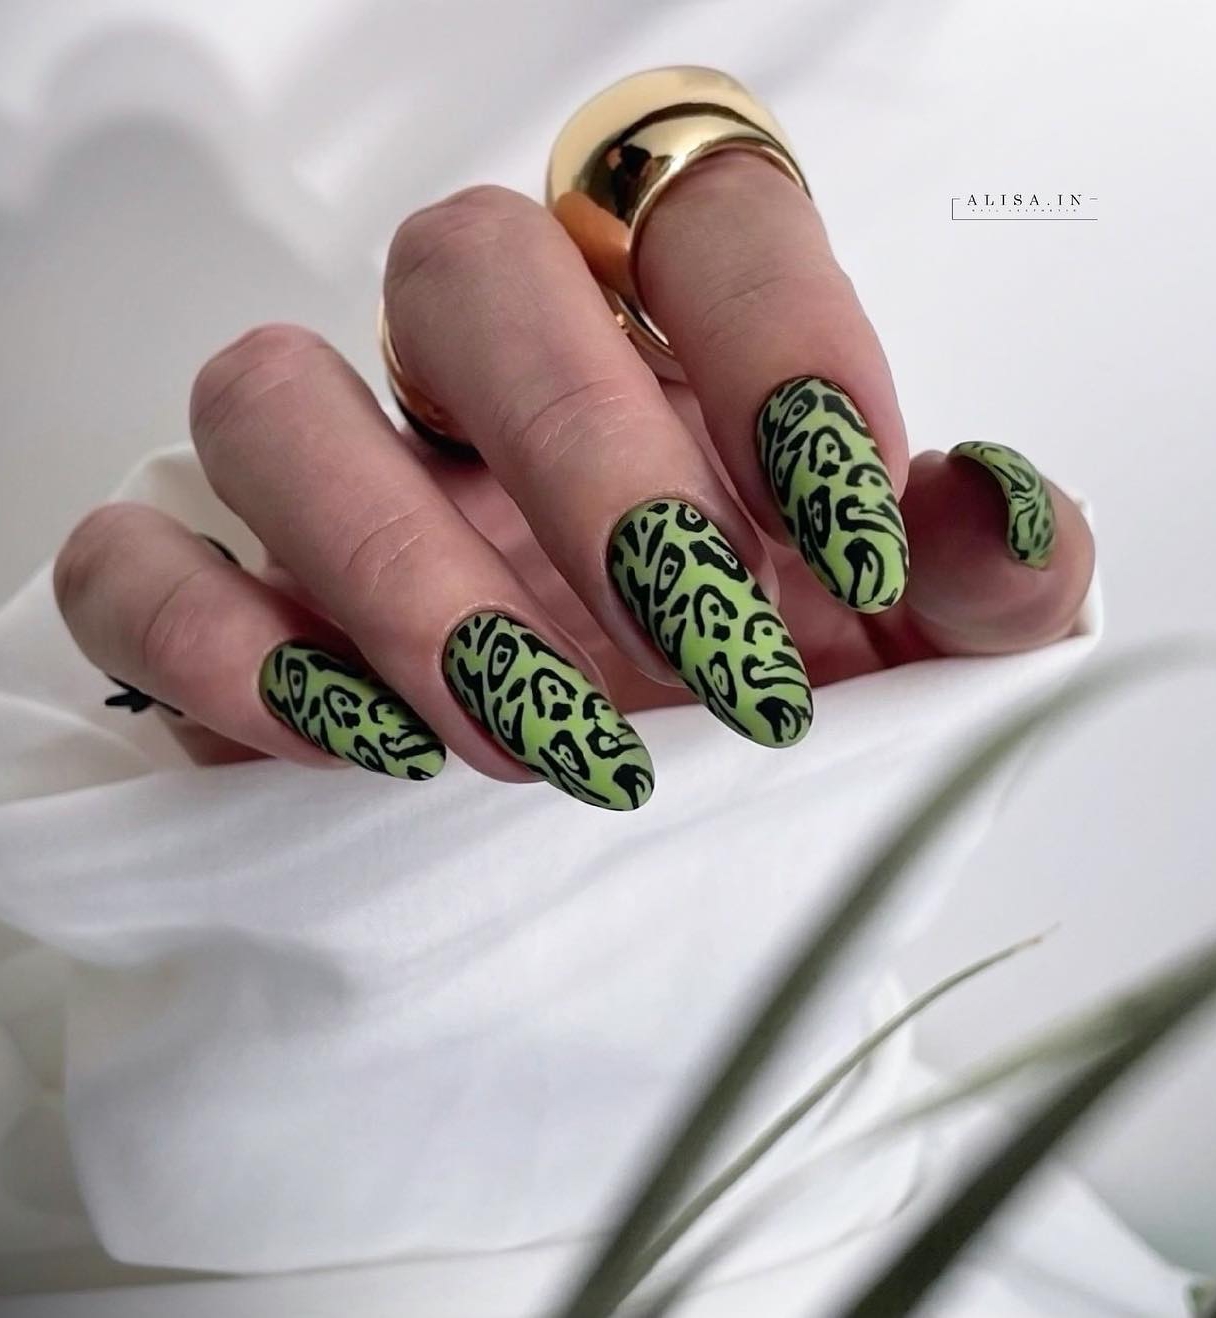 Round Black and Green Nails with Leopard Design